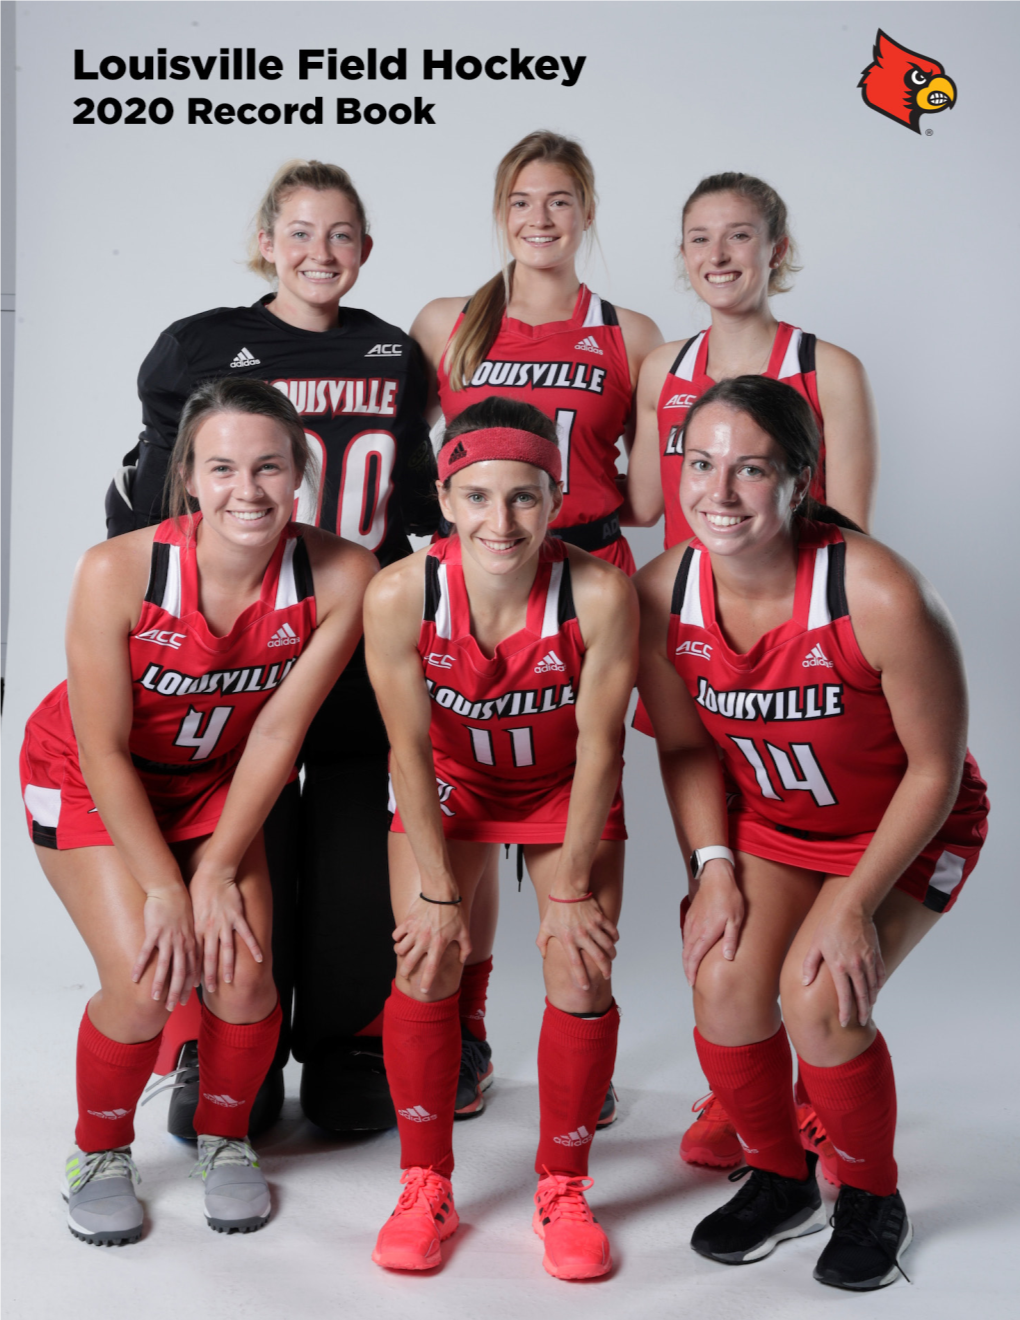 Gocards.Com | University of Louisville TABLE of CONTENTS 2020 FIELD HOCKEY QUICK FACTS GENERAL INFORMATION 2019 Statistics & Results